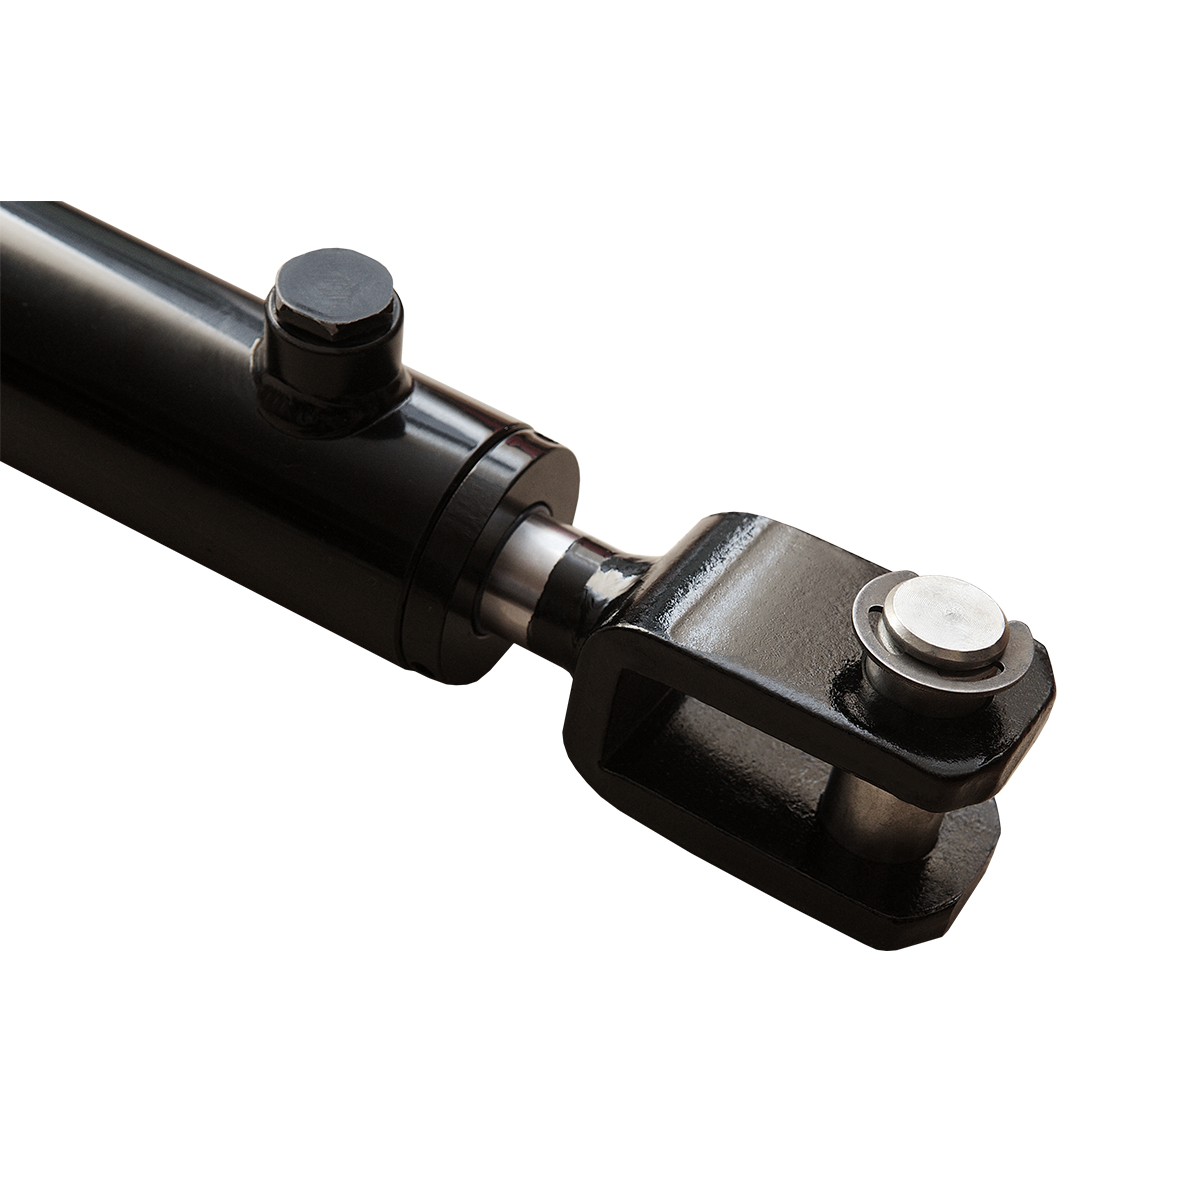 2 bore x 8 ASAE stroke hydraulic cylinder, ag clevis double acting cylinder | Magister Hydraulics